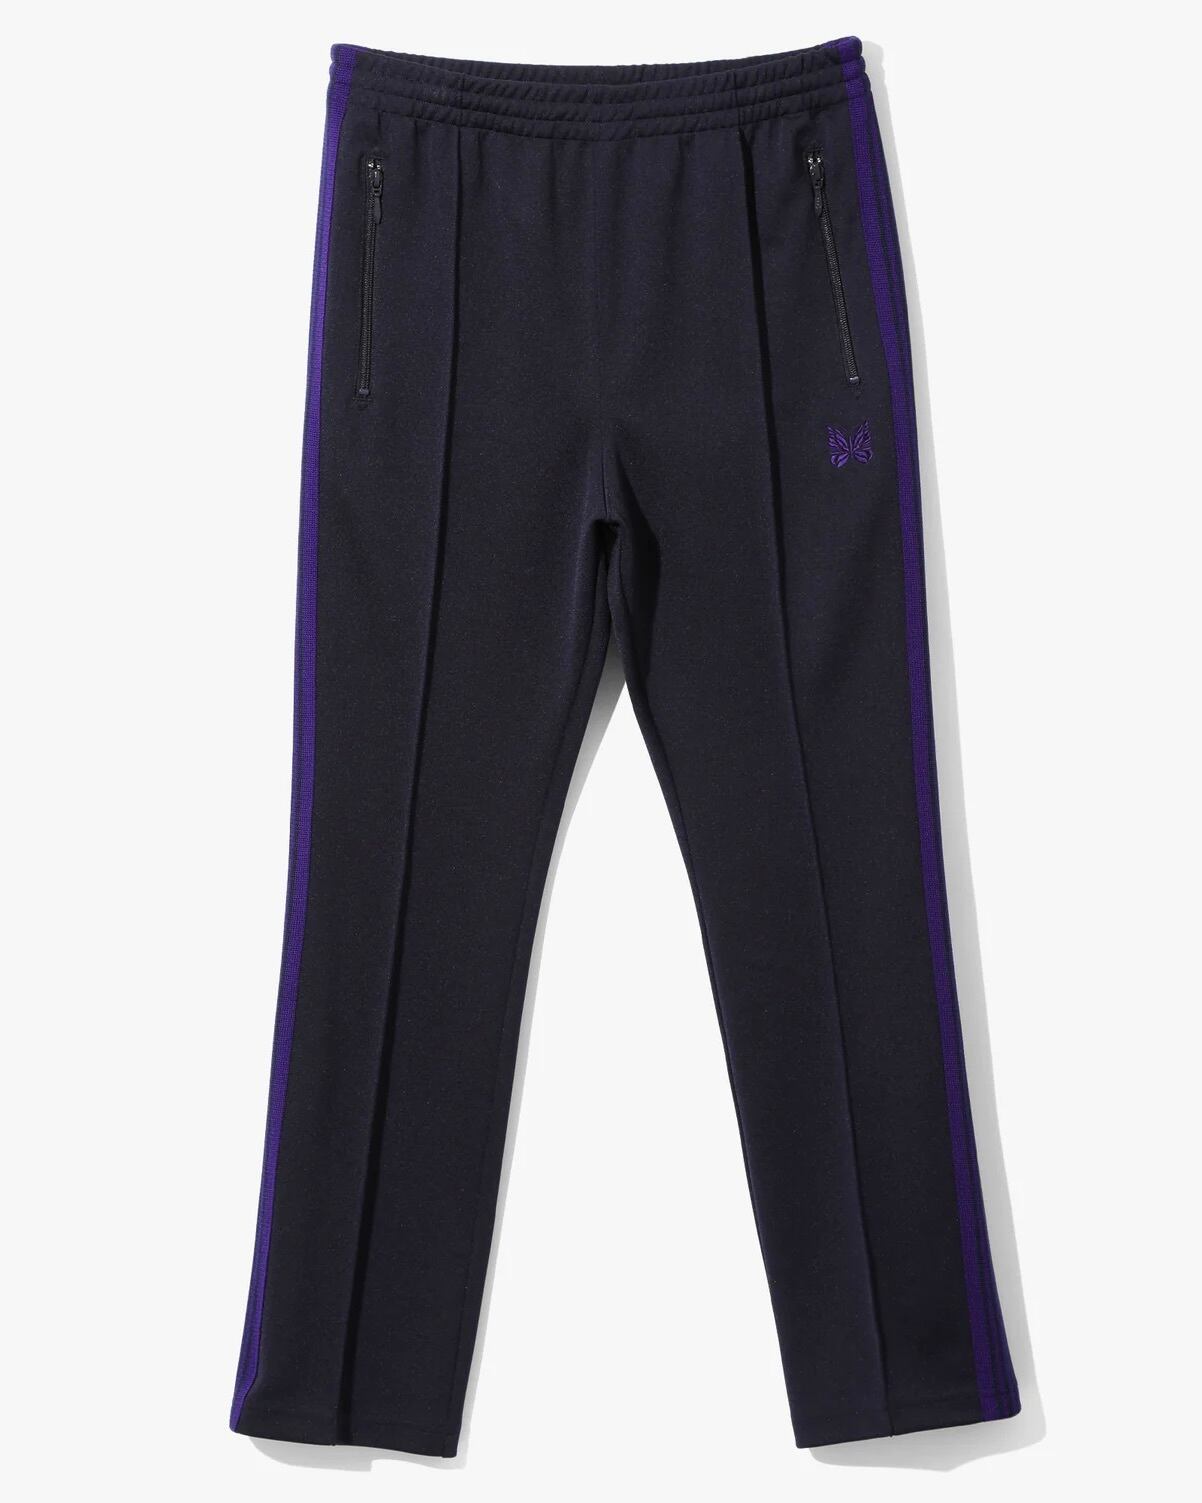 NEEDLES】NARROW TRACK PANT - POLY SMOOTH | idealclasse